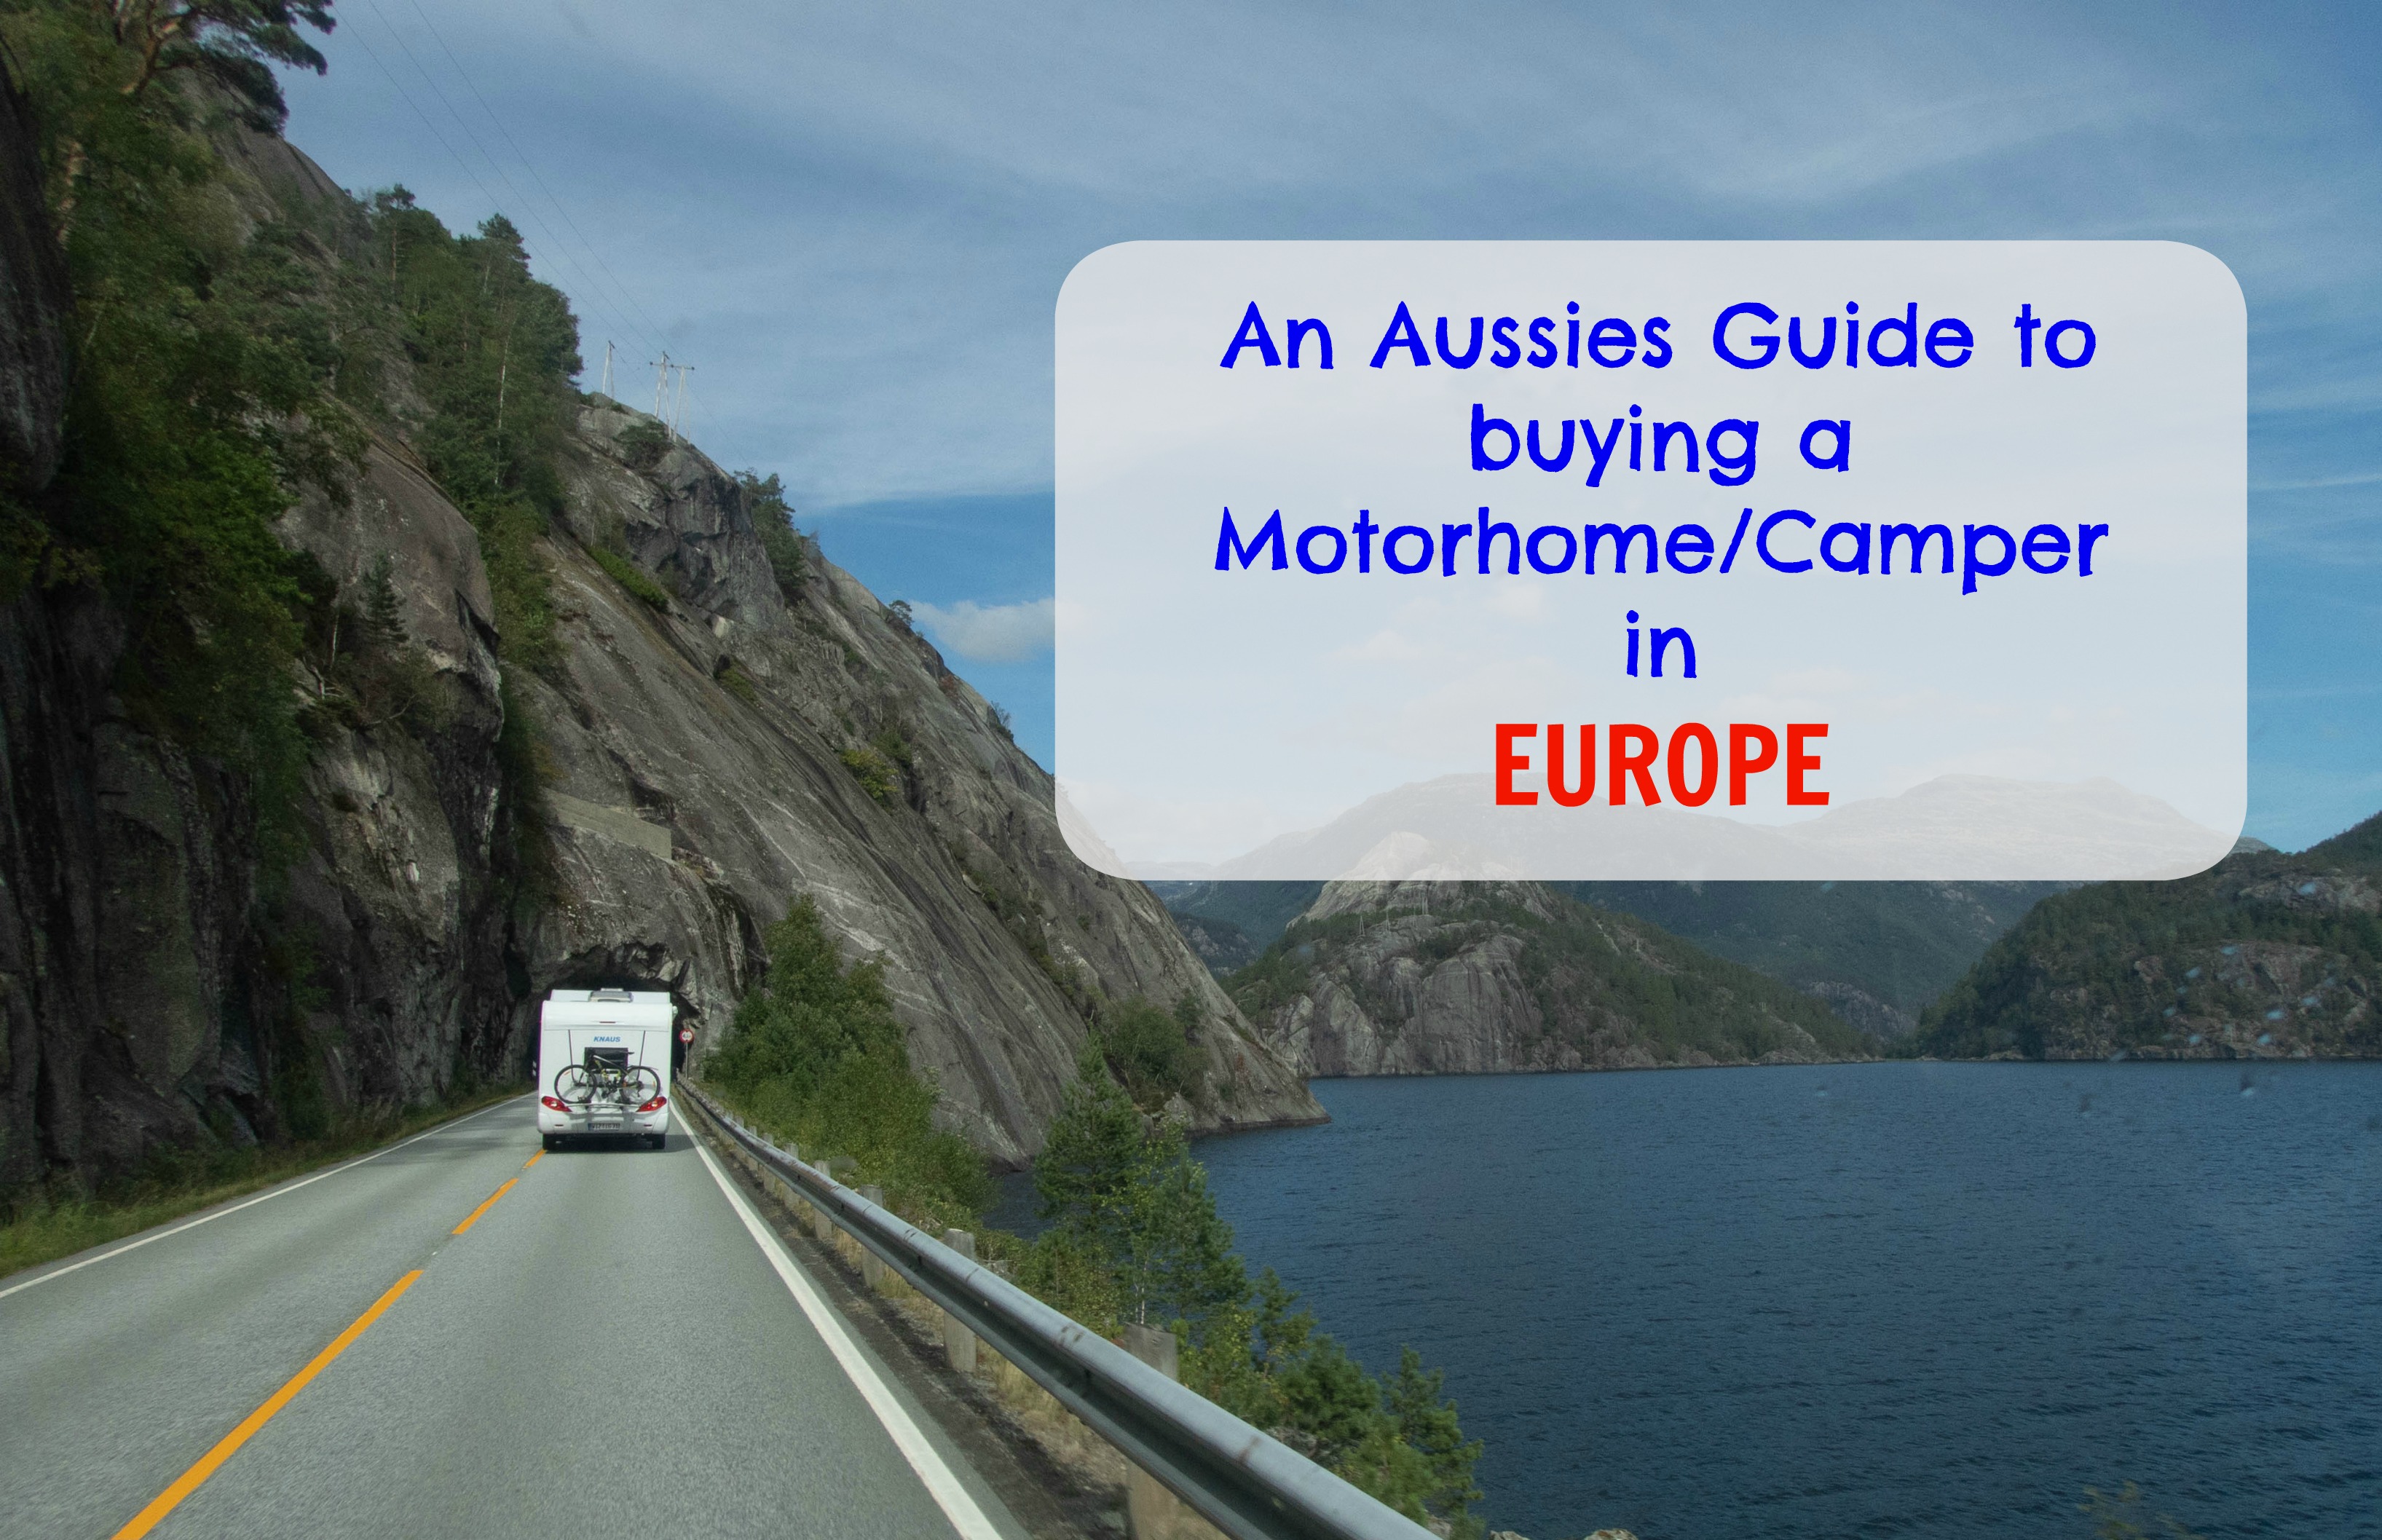 An Aussies Guide to buying a Motorhome/Camper in Europe